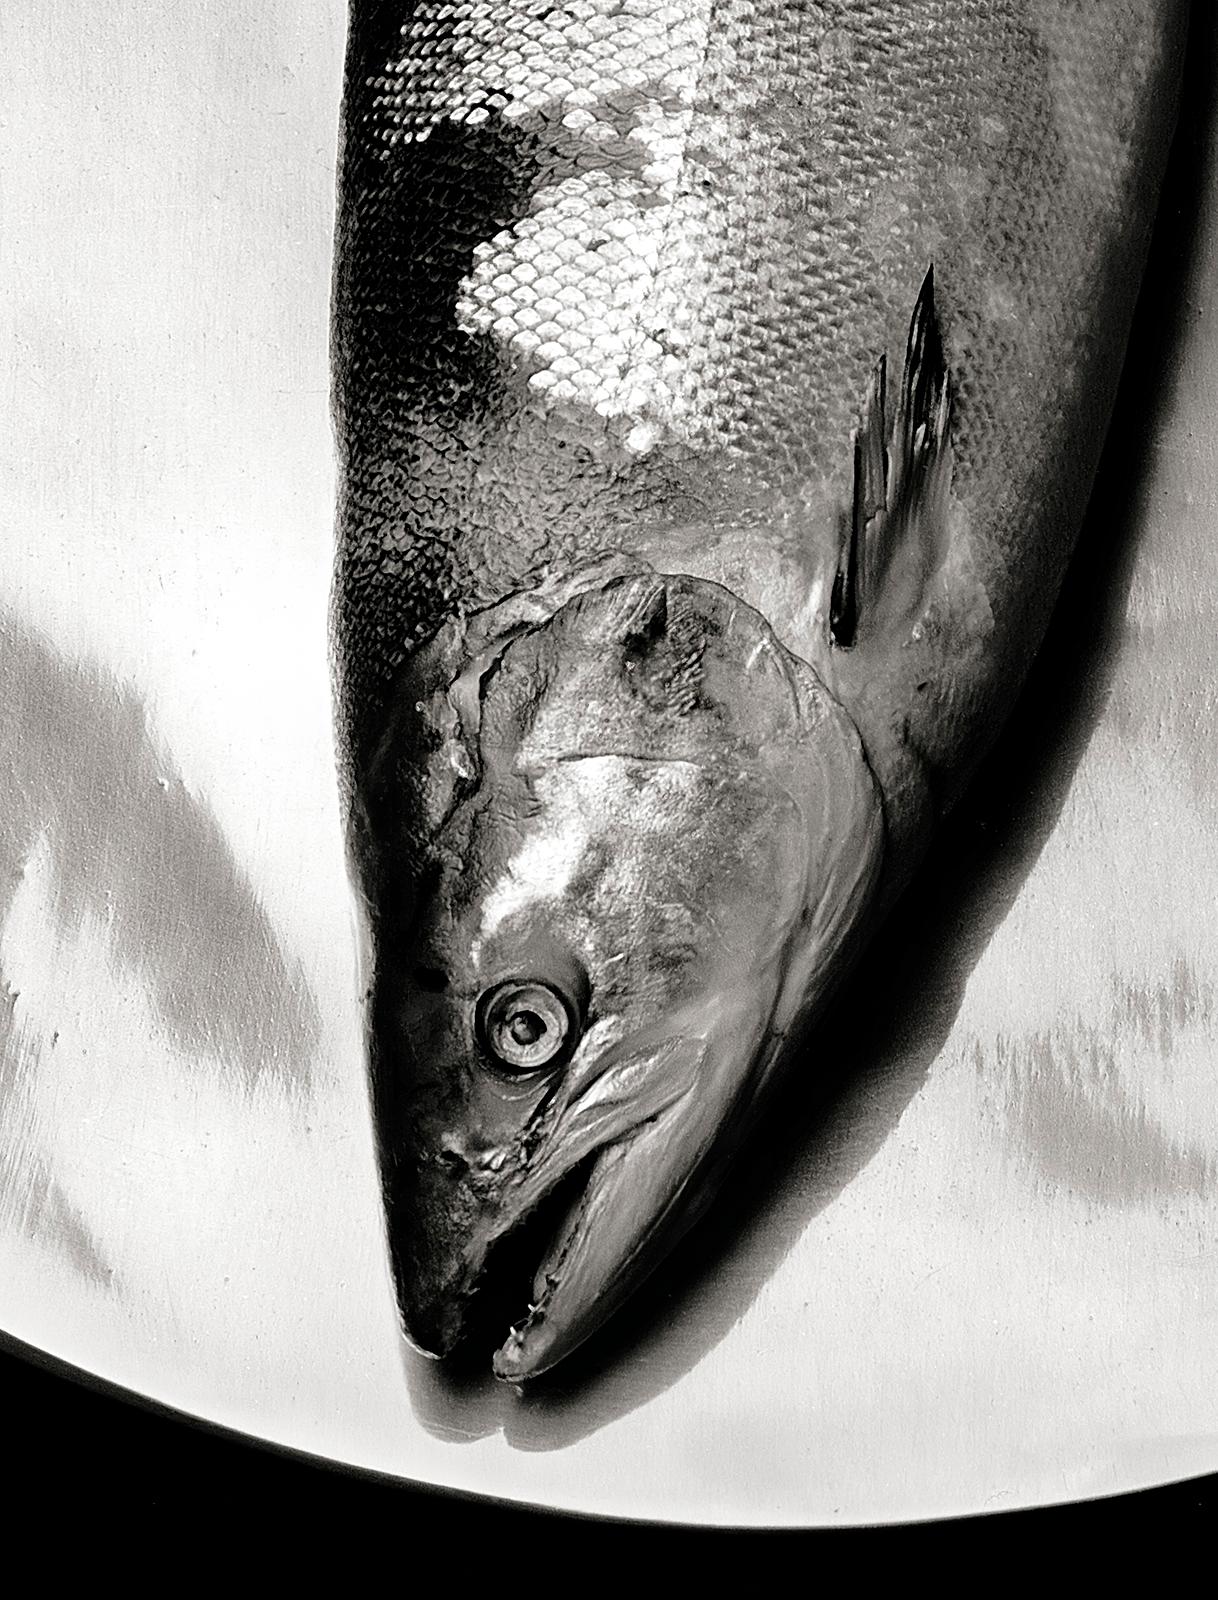 Salmon-Signed limited edition still life sea print, Black white photo, Nature - Photograph by Ian Sanderson